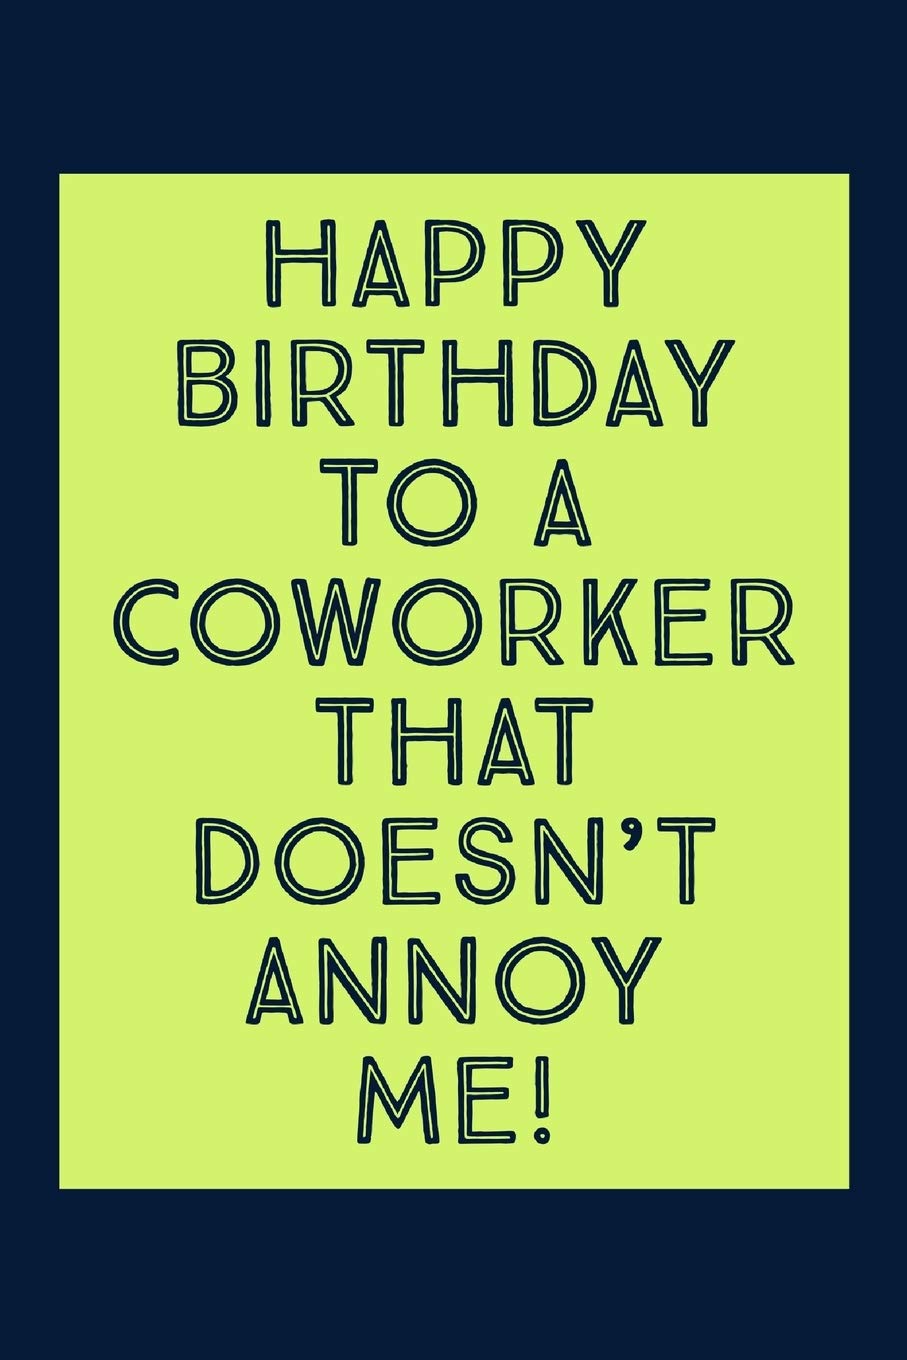 creative ways to say happy birthday to coworker